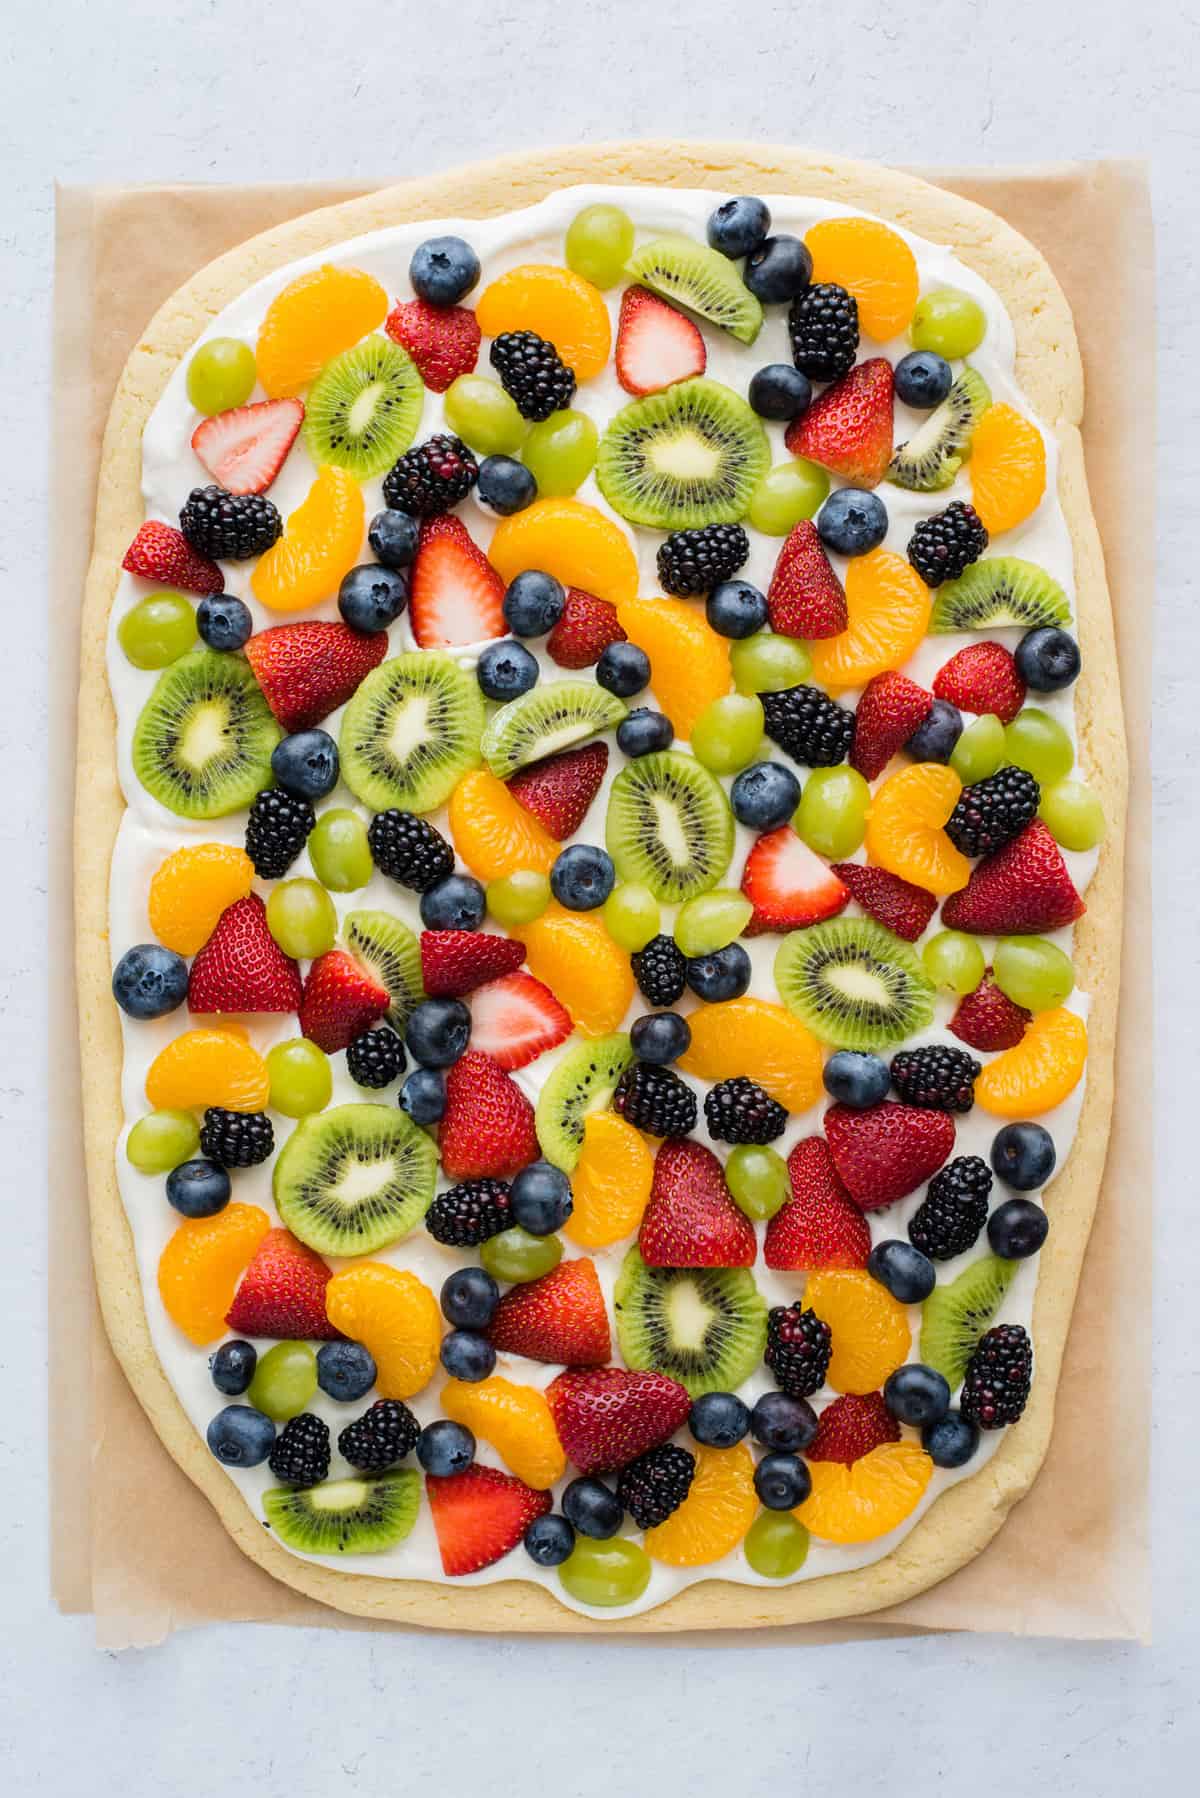 a whole fruit pizza with strawberries, blueberries, mandarin oranges, kiwis and grapes on brown parchment paper